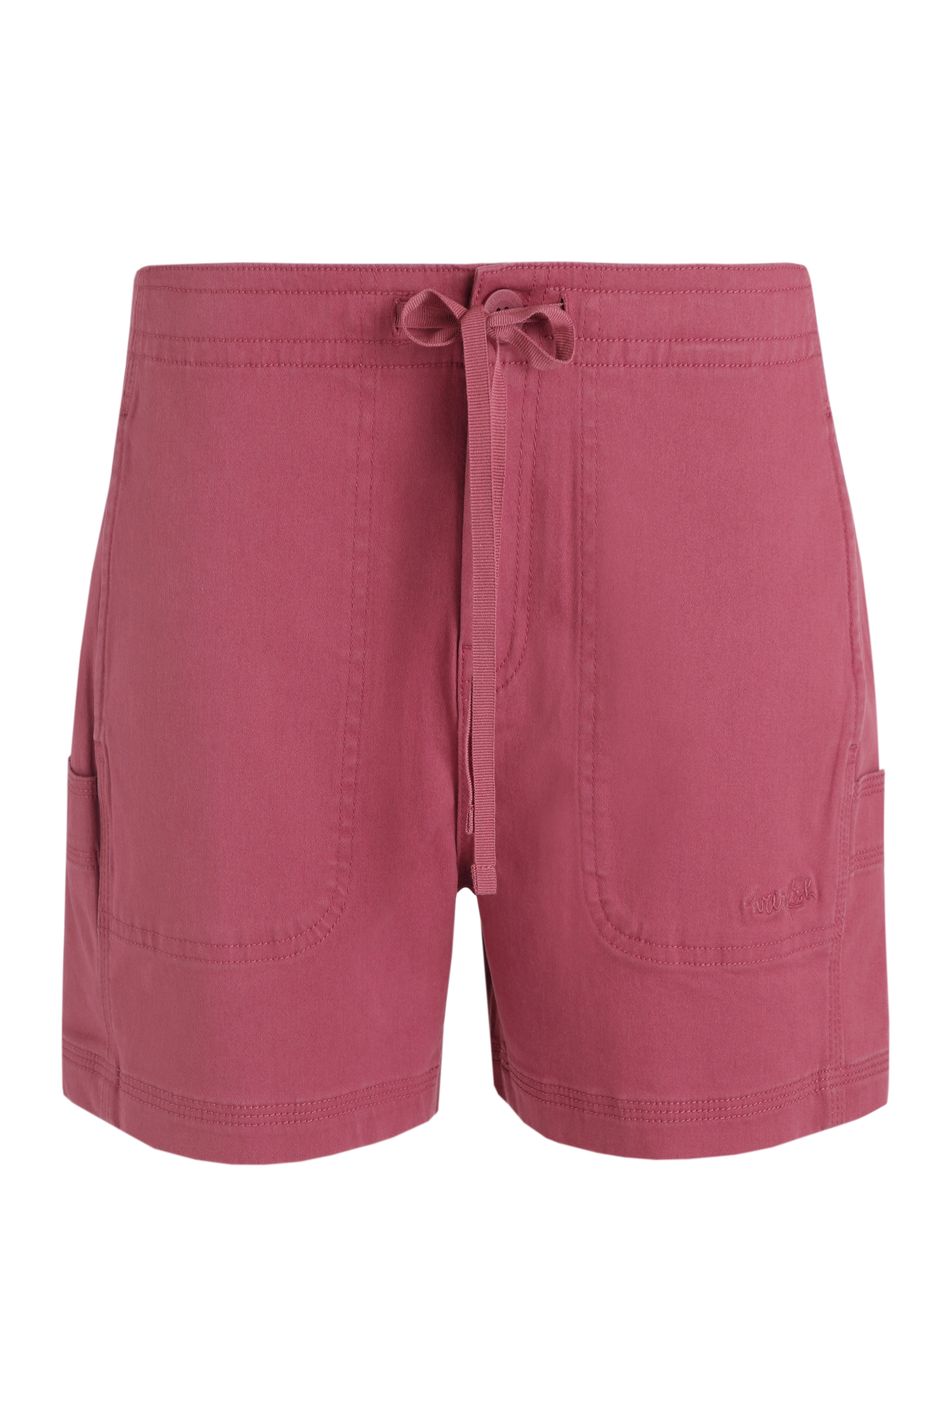 Willoughby Summer Shorts Crushed Berry | Weird Fish